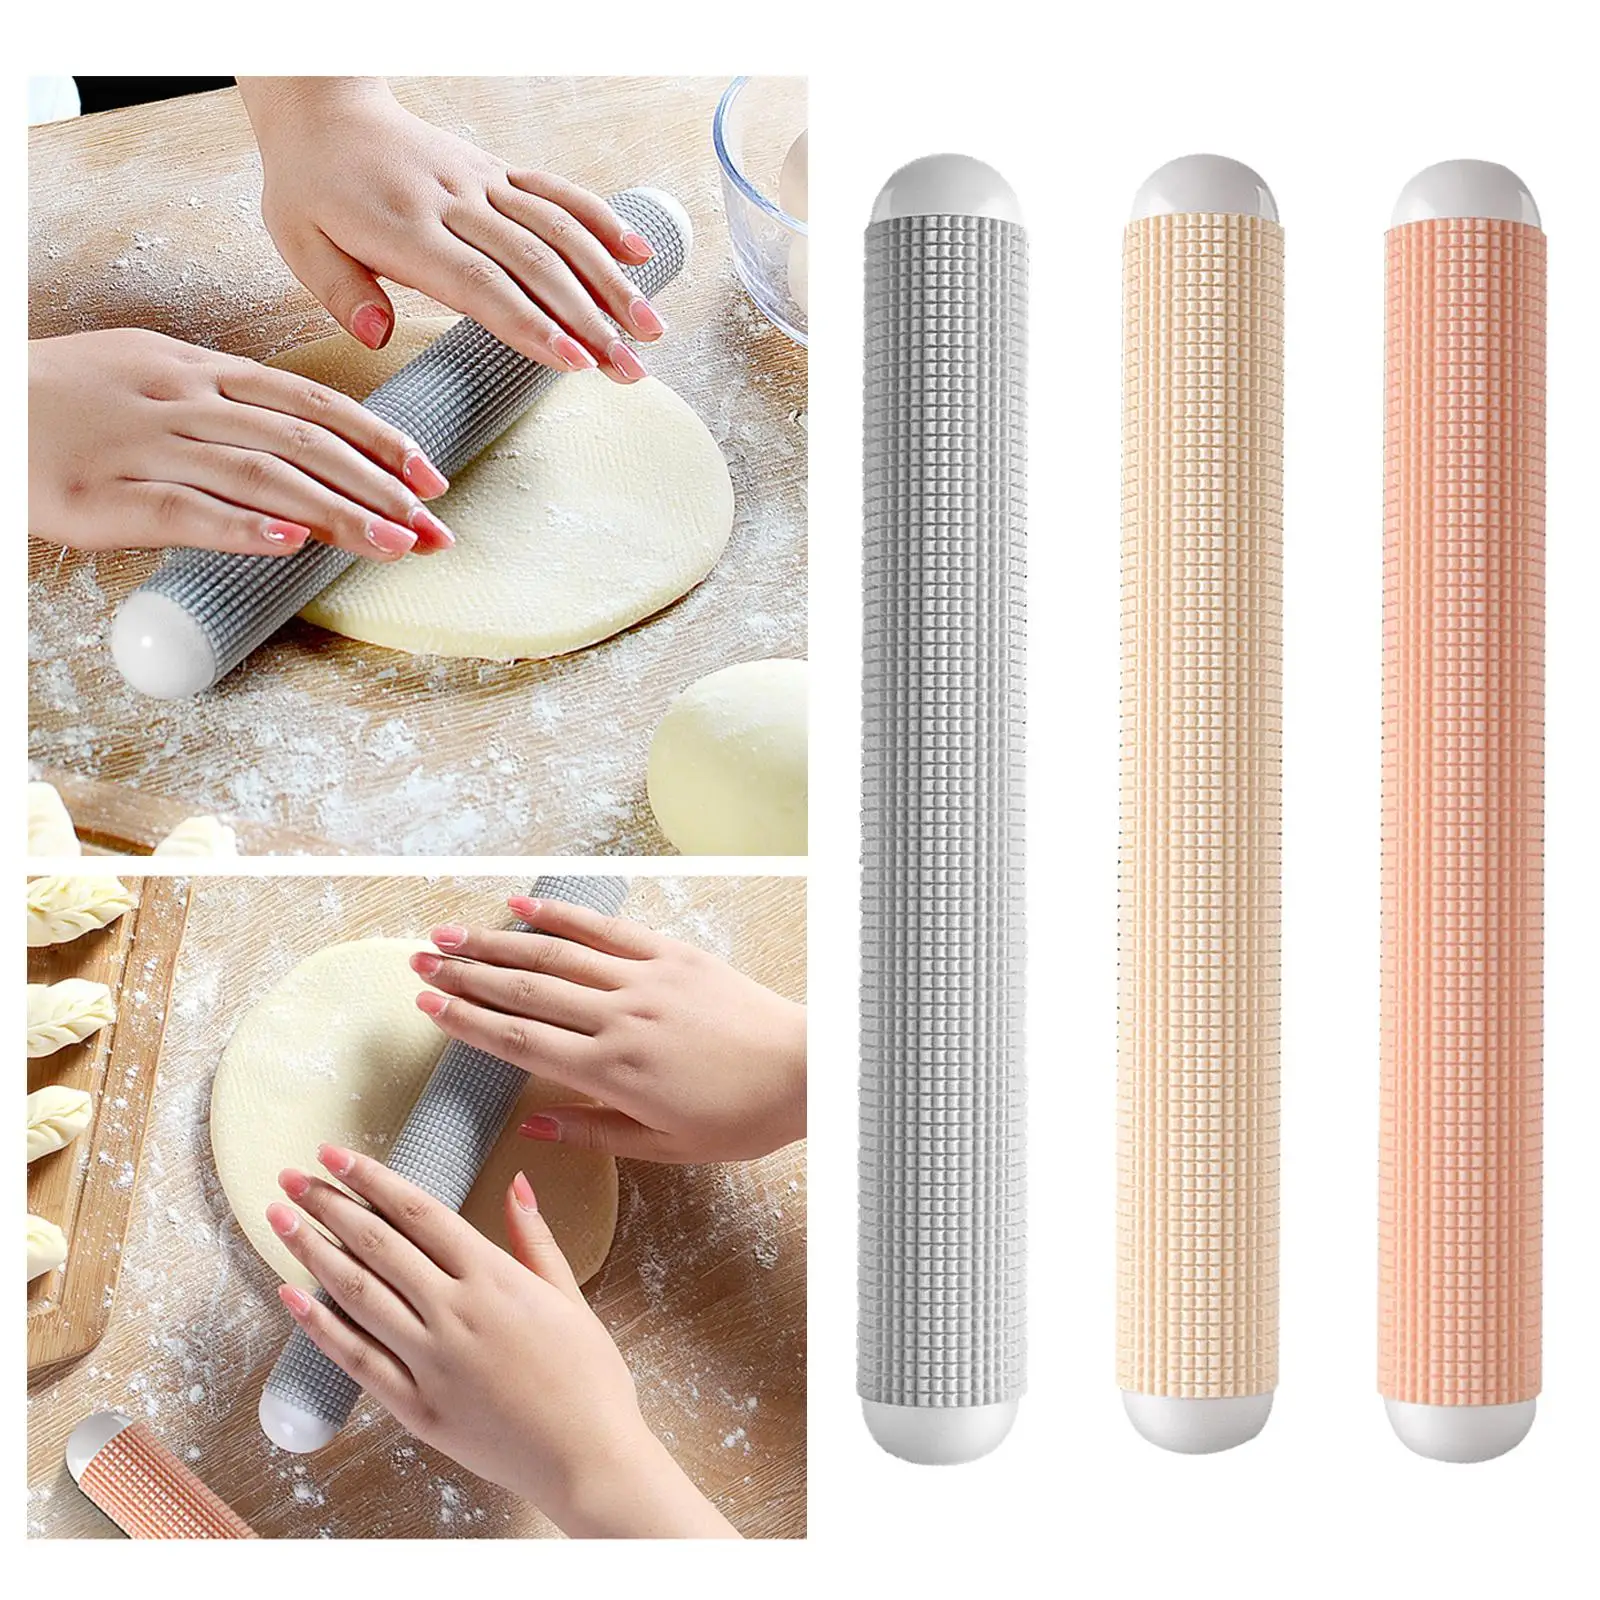 Professional Rolling Pin Non-Stick Cooking Tool Utensil Premium Dough Roller for Home Bread Baking Kitchen Pastry